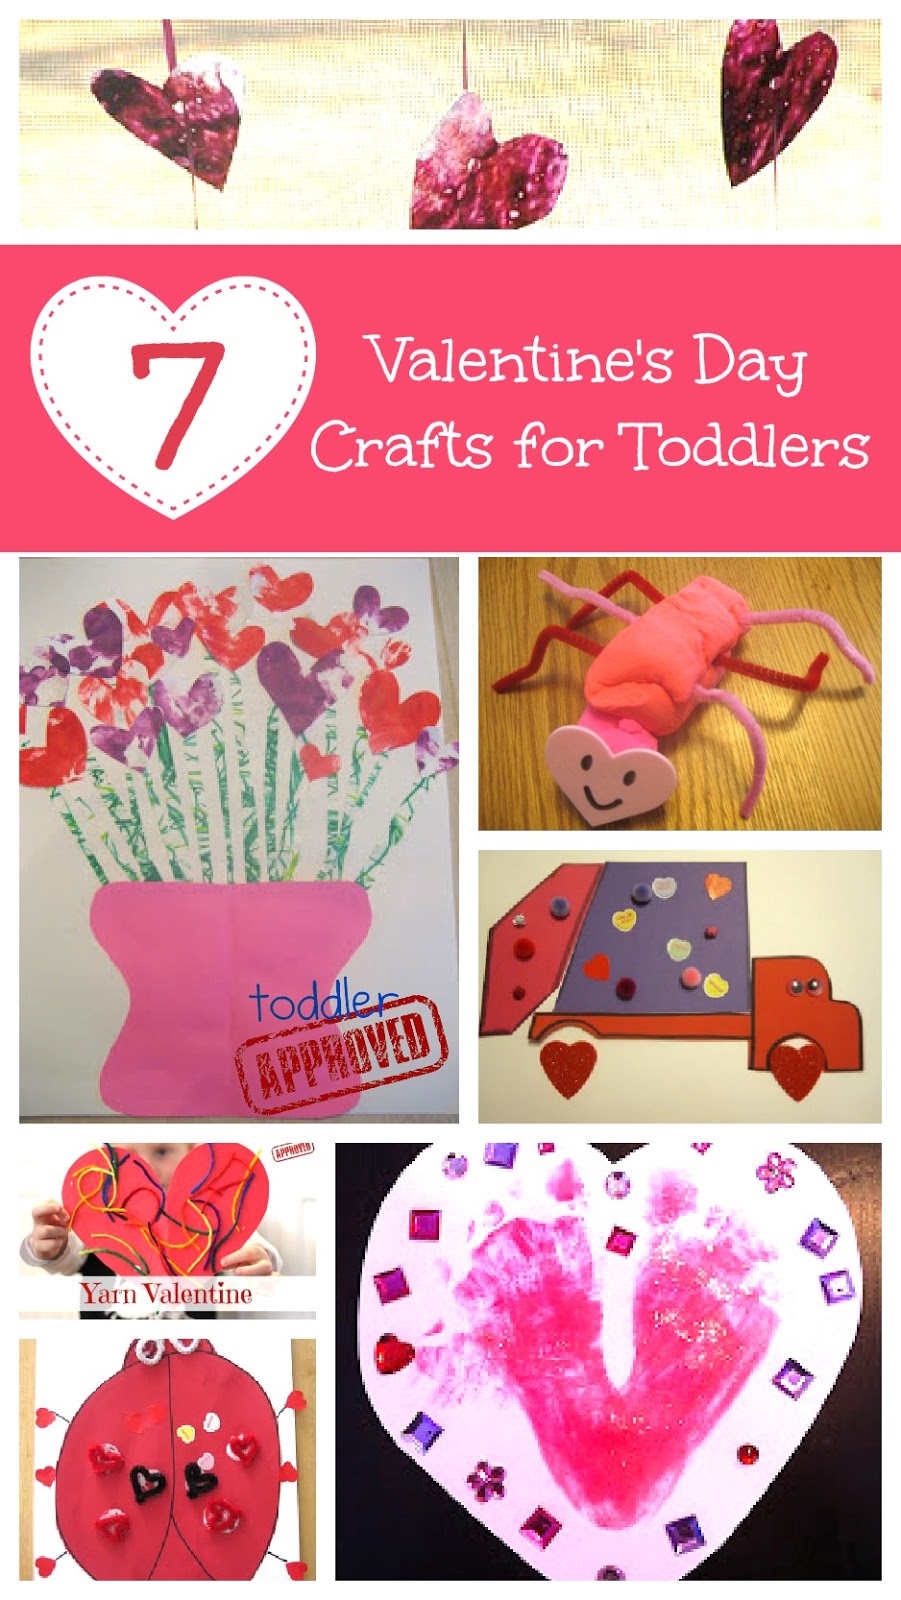 Toddler Approved!: 7 Valentine's Day Crafts for Toddlers